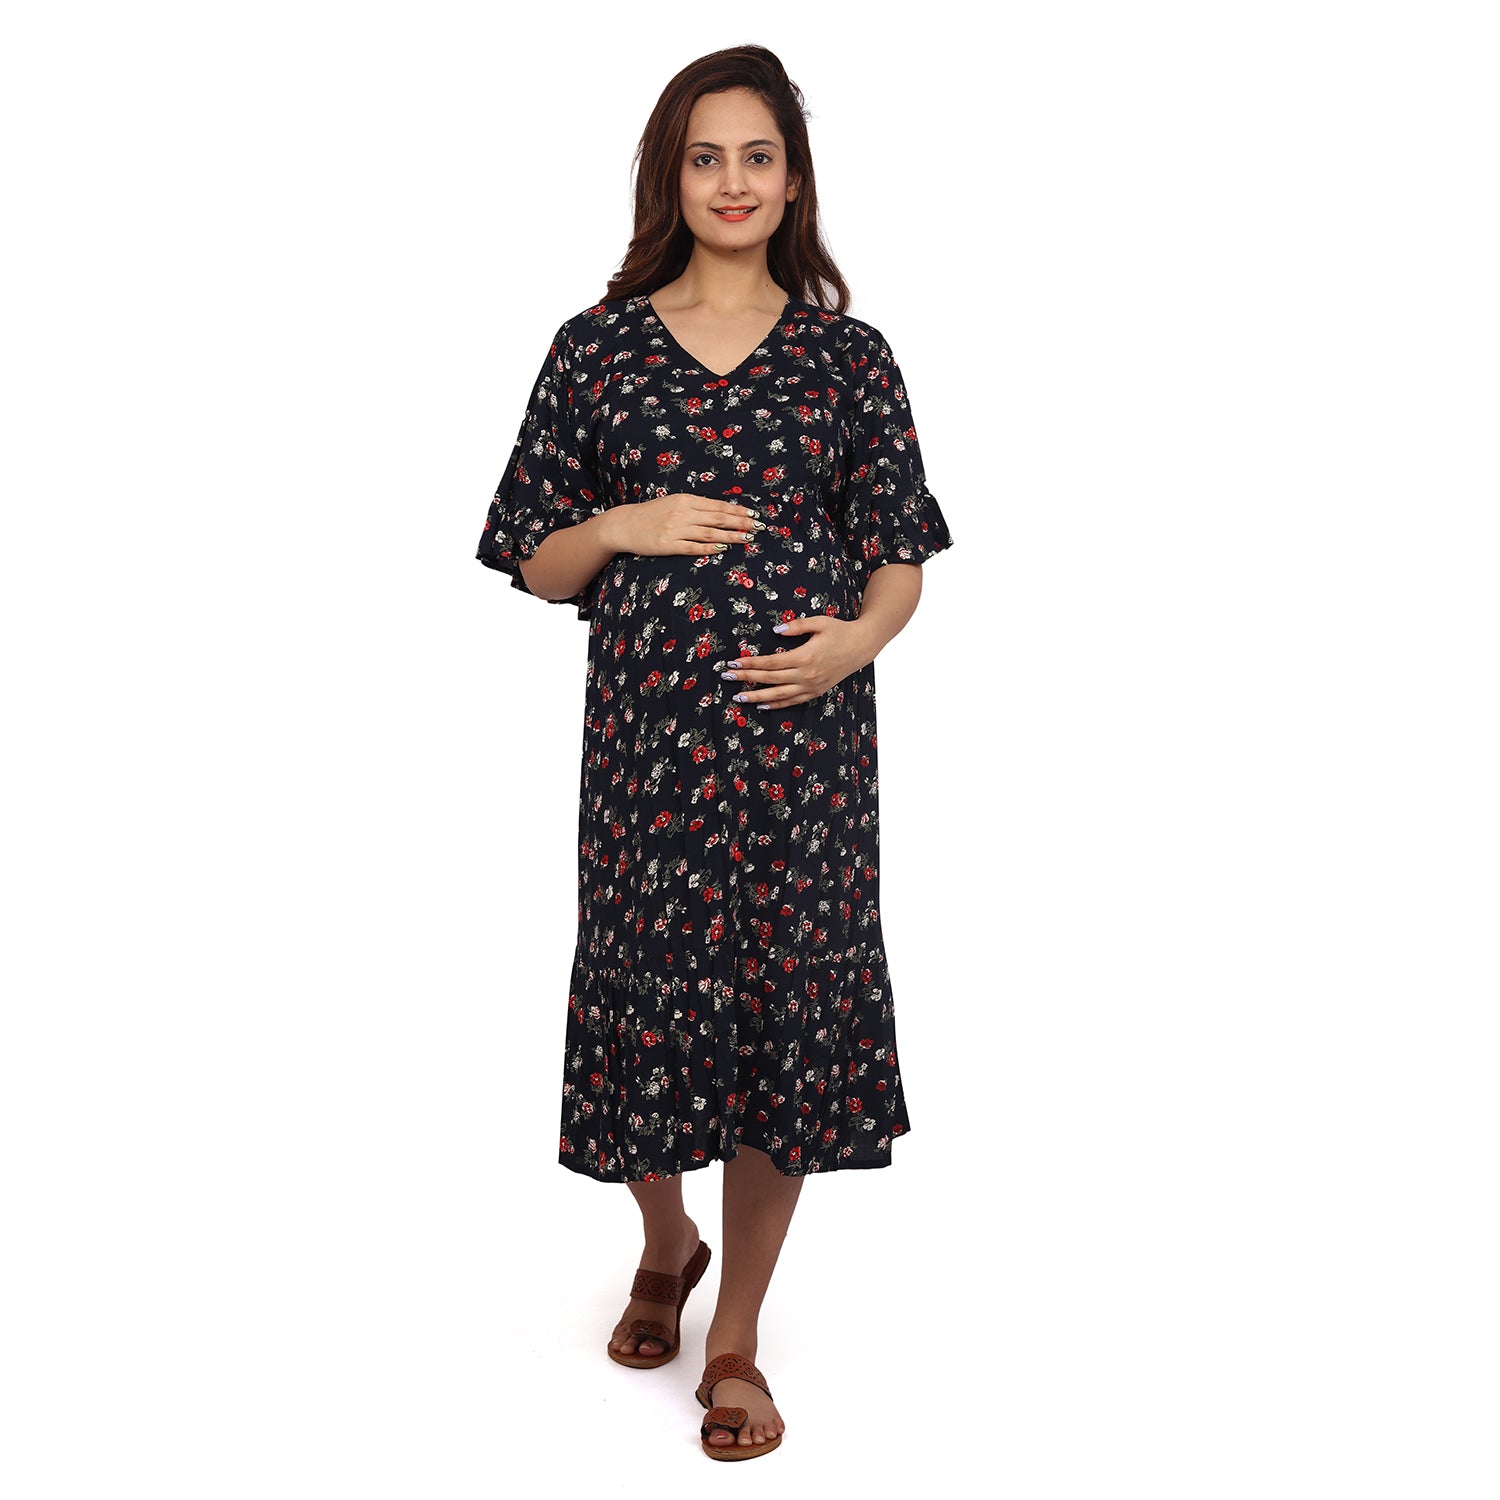 Baby Moo Half Sleeves Comfortable Nursing And Maternity Dress With Pocket Floral - Blue